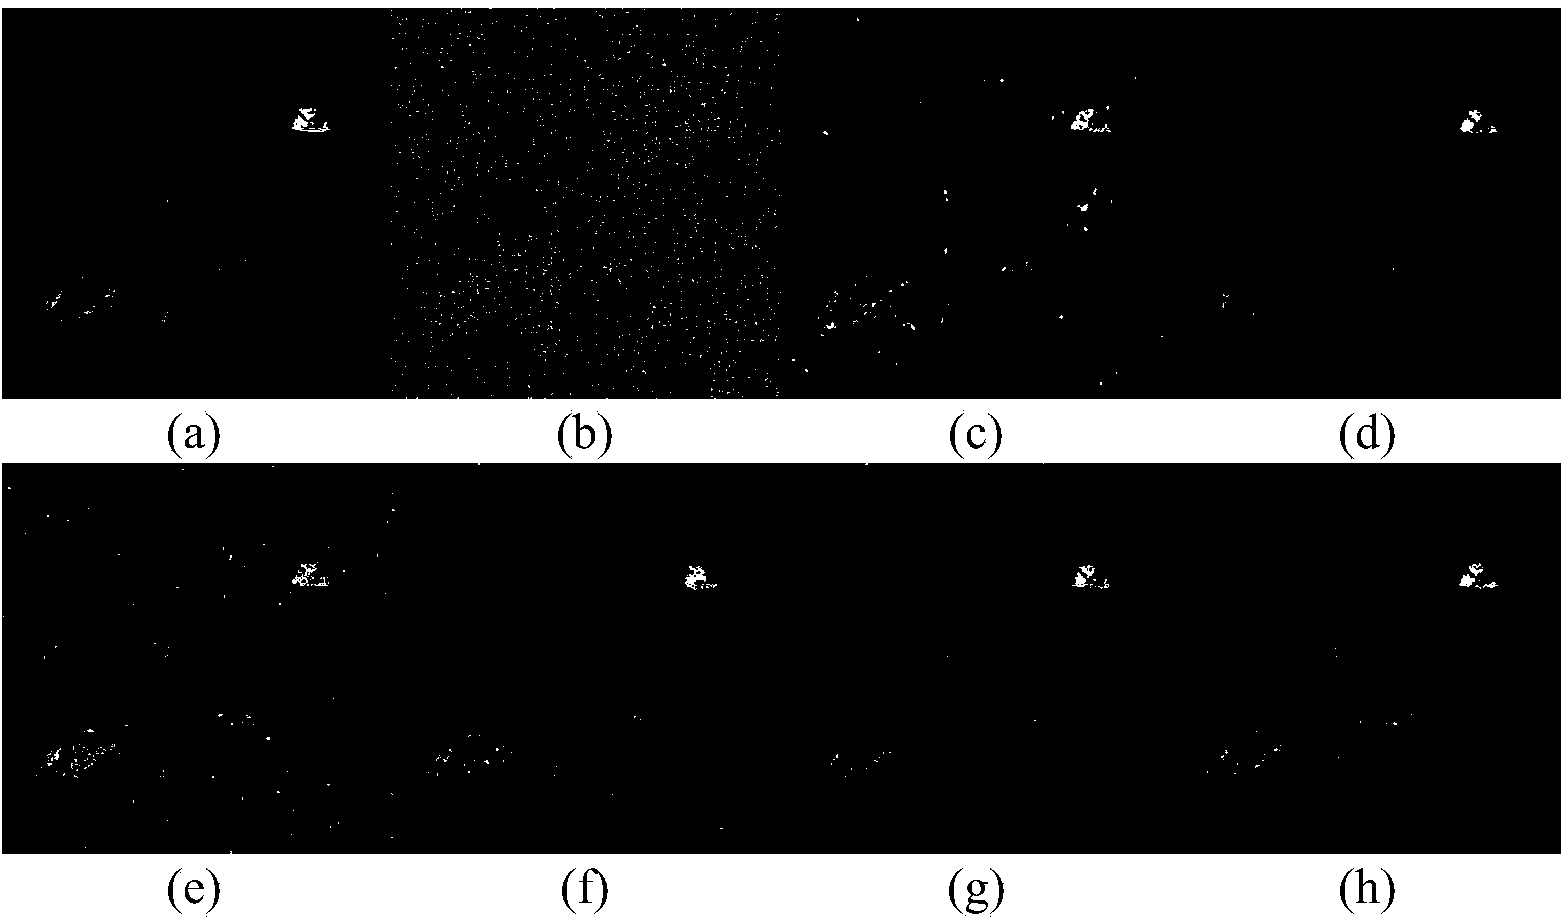 Salt and pepper noise filtering method based on similar function with better self-adaptation, denoising and detail protection capabilities